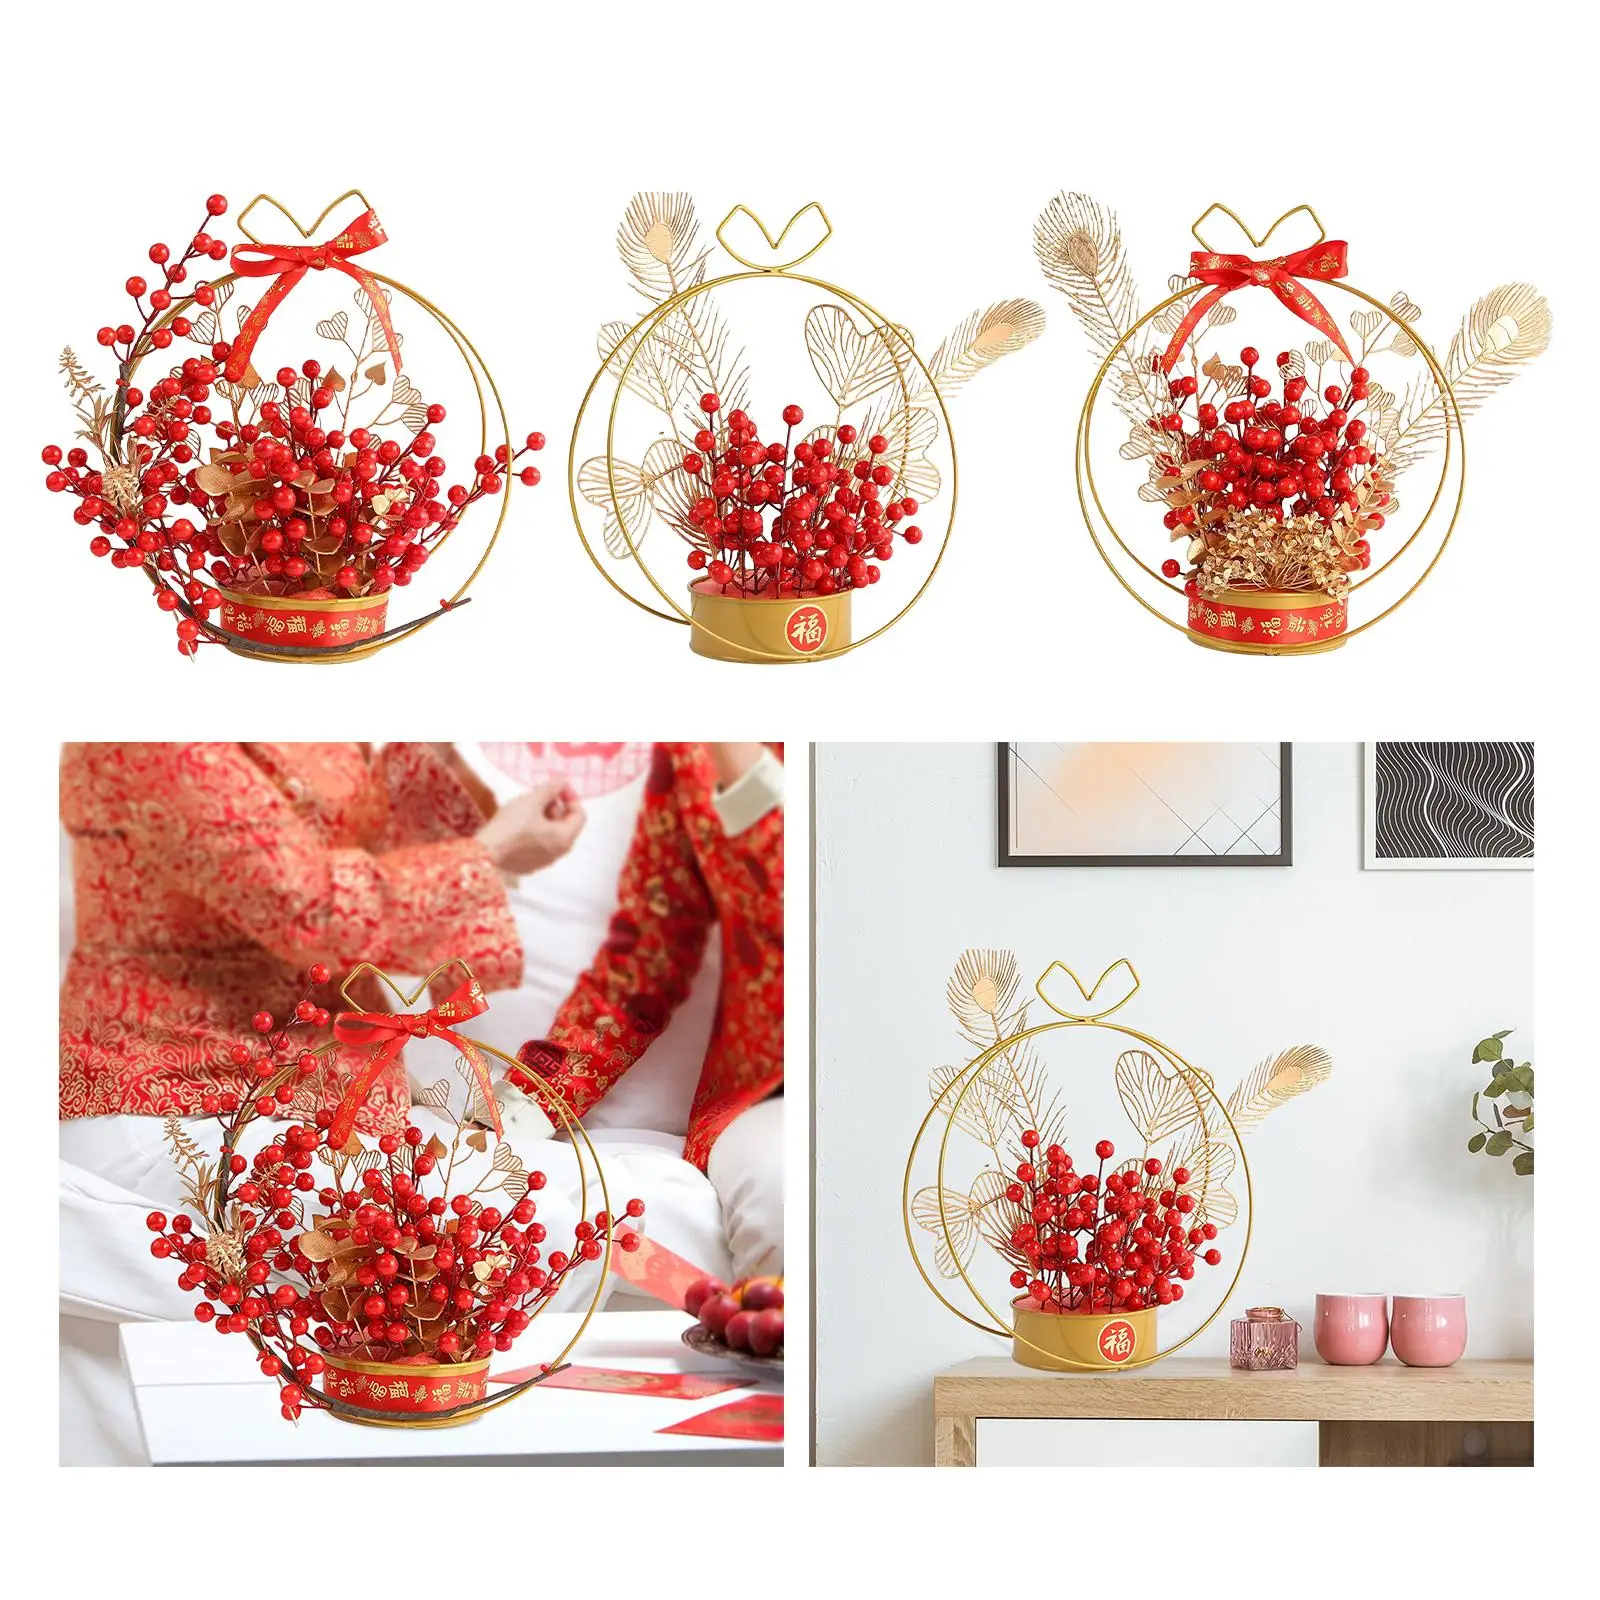 Chinese Flower Basket Ornament Decor Tabletop Door Hanging Spring Festival Centerpiece New Year for Indoor Party Holiday Wedding